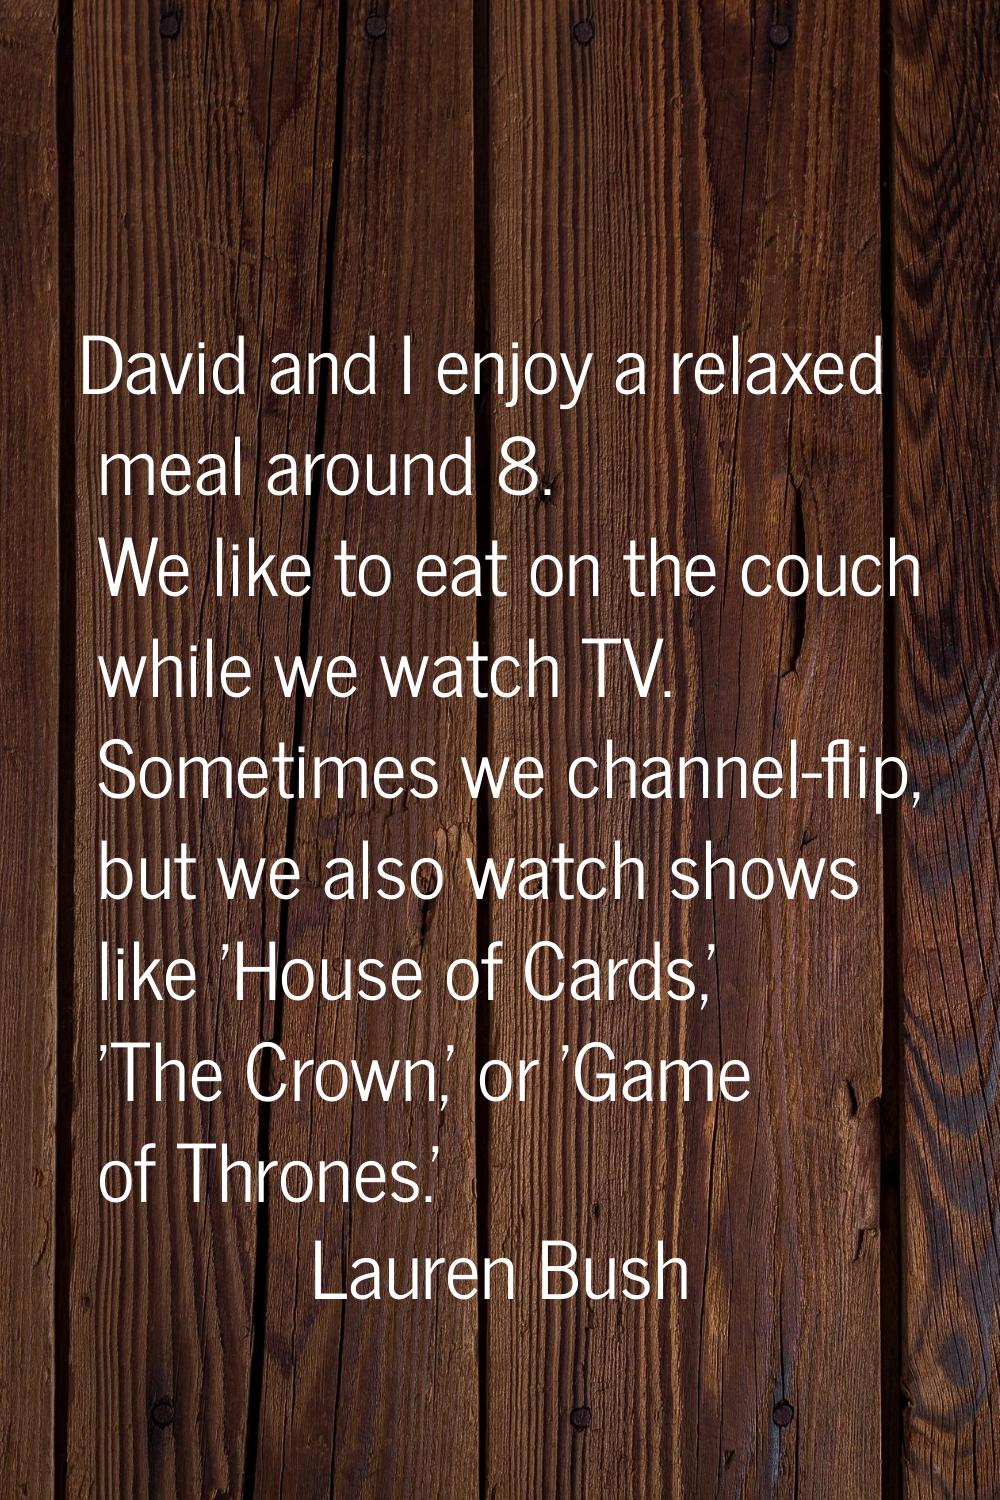 David and I enjoy a relaxed meal around 8. We like to eat on the couch while we watch TV. Sometimes